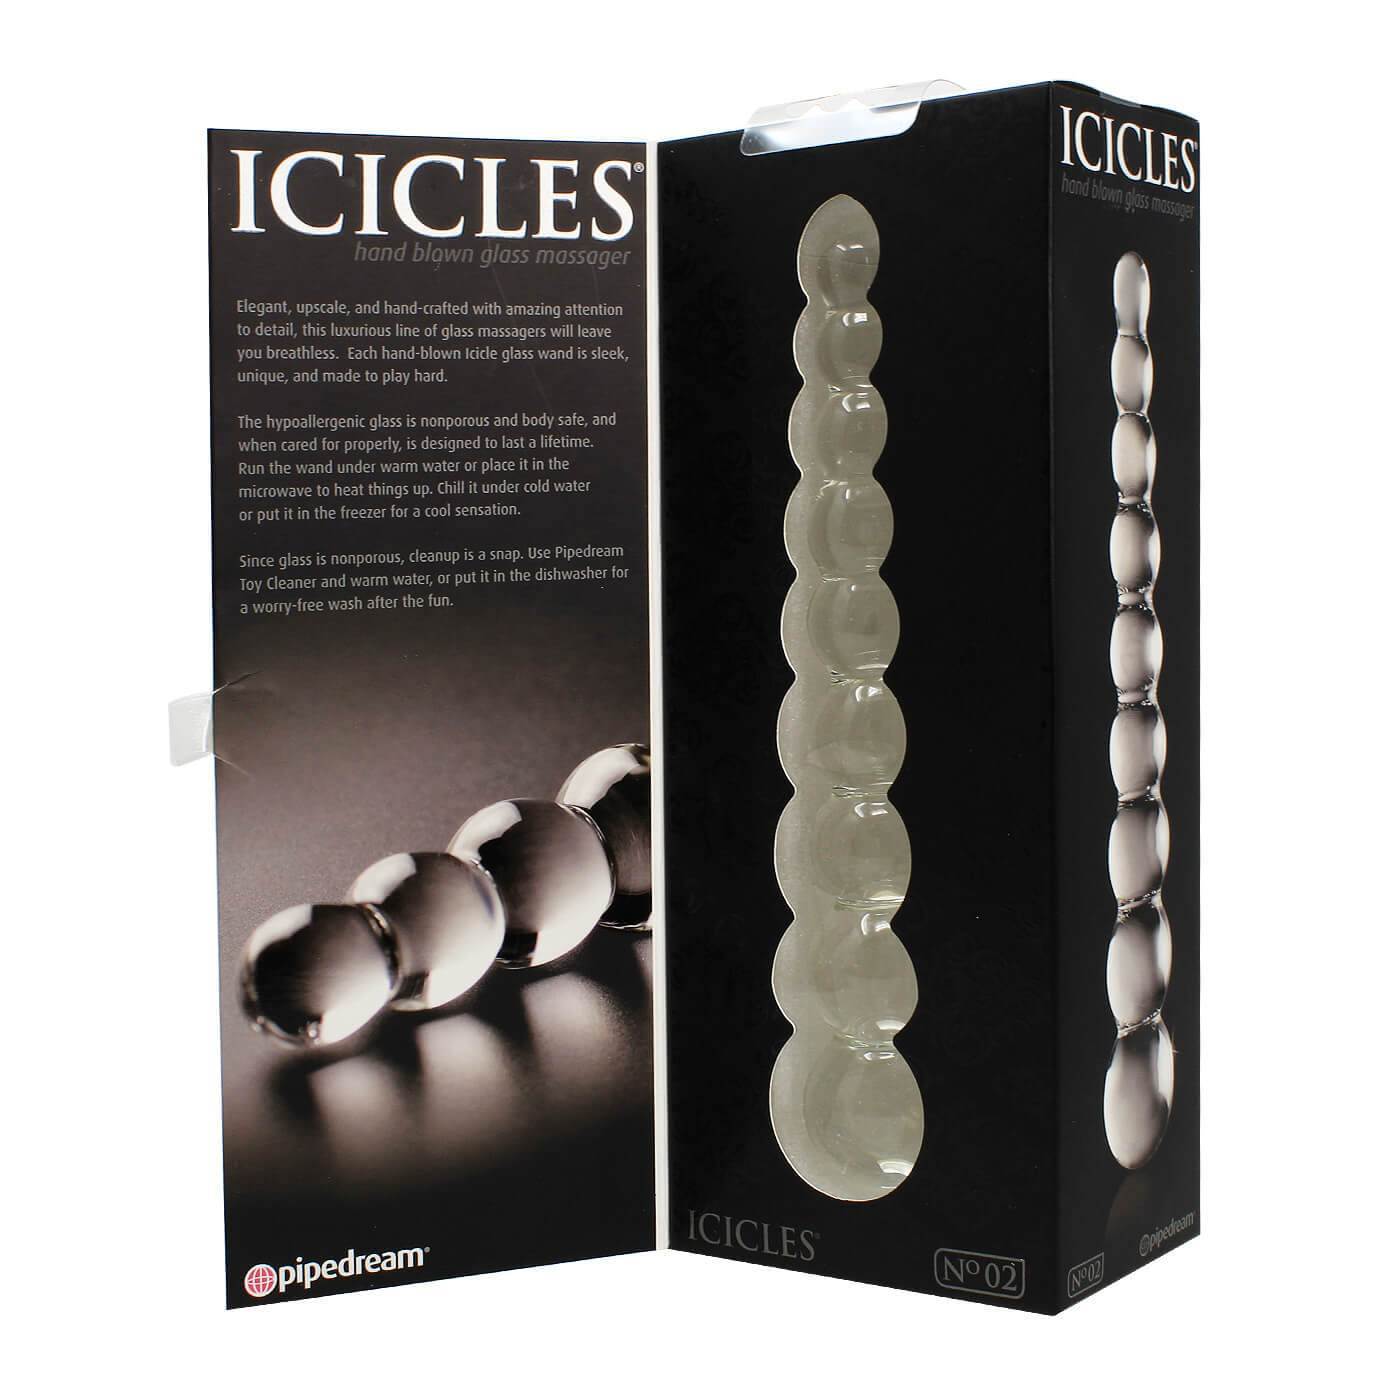 Rubble reccomend Glass dildos with marbles in them